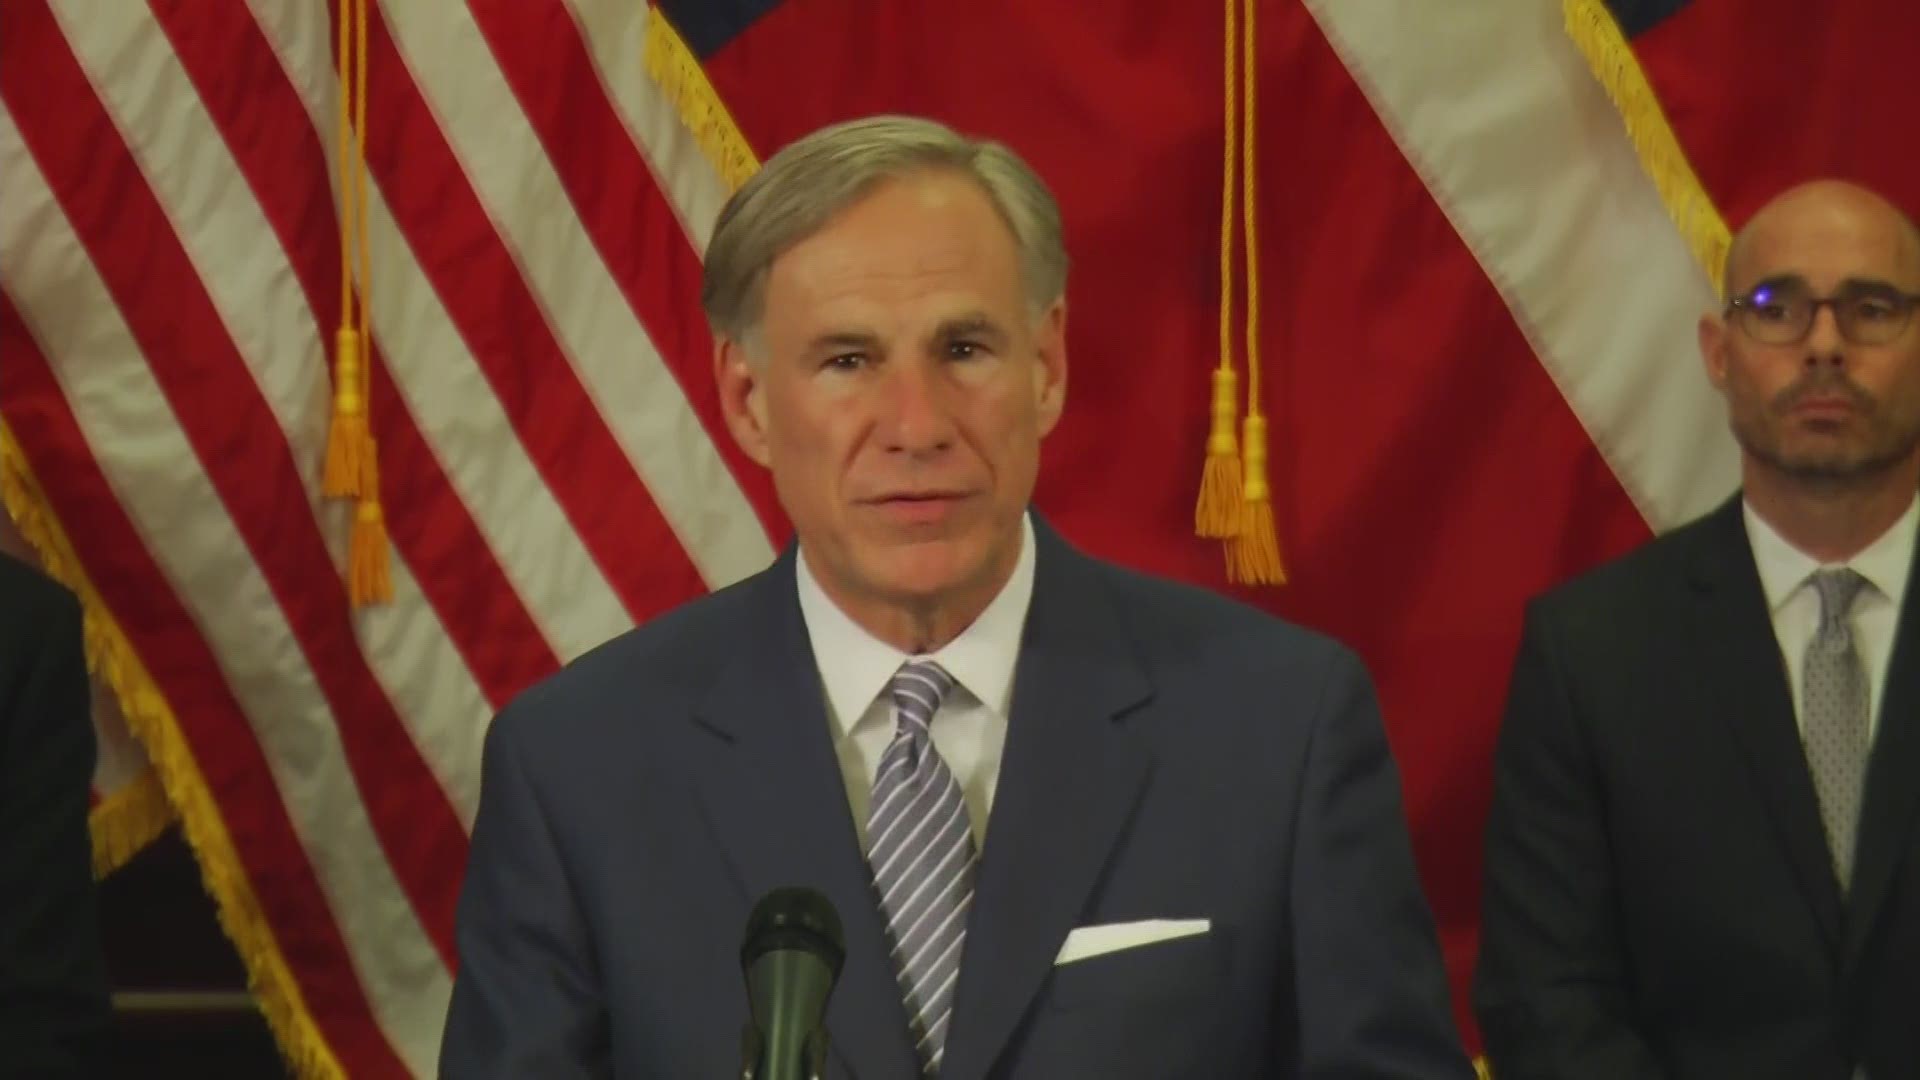 This order includes all public, private and higher education institutions, Gov. Greg Abbott said in his announcement Friday.